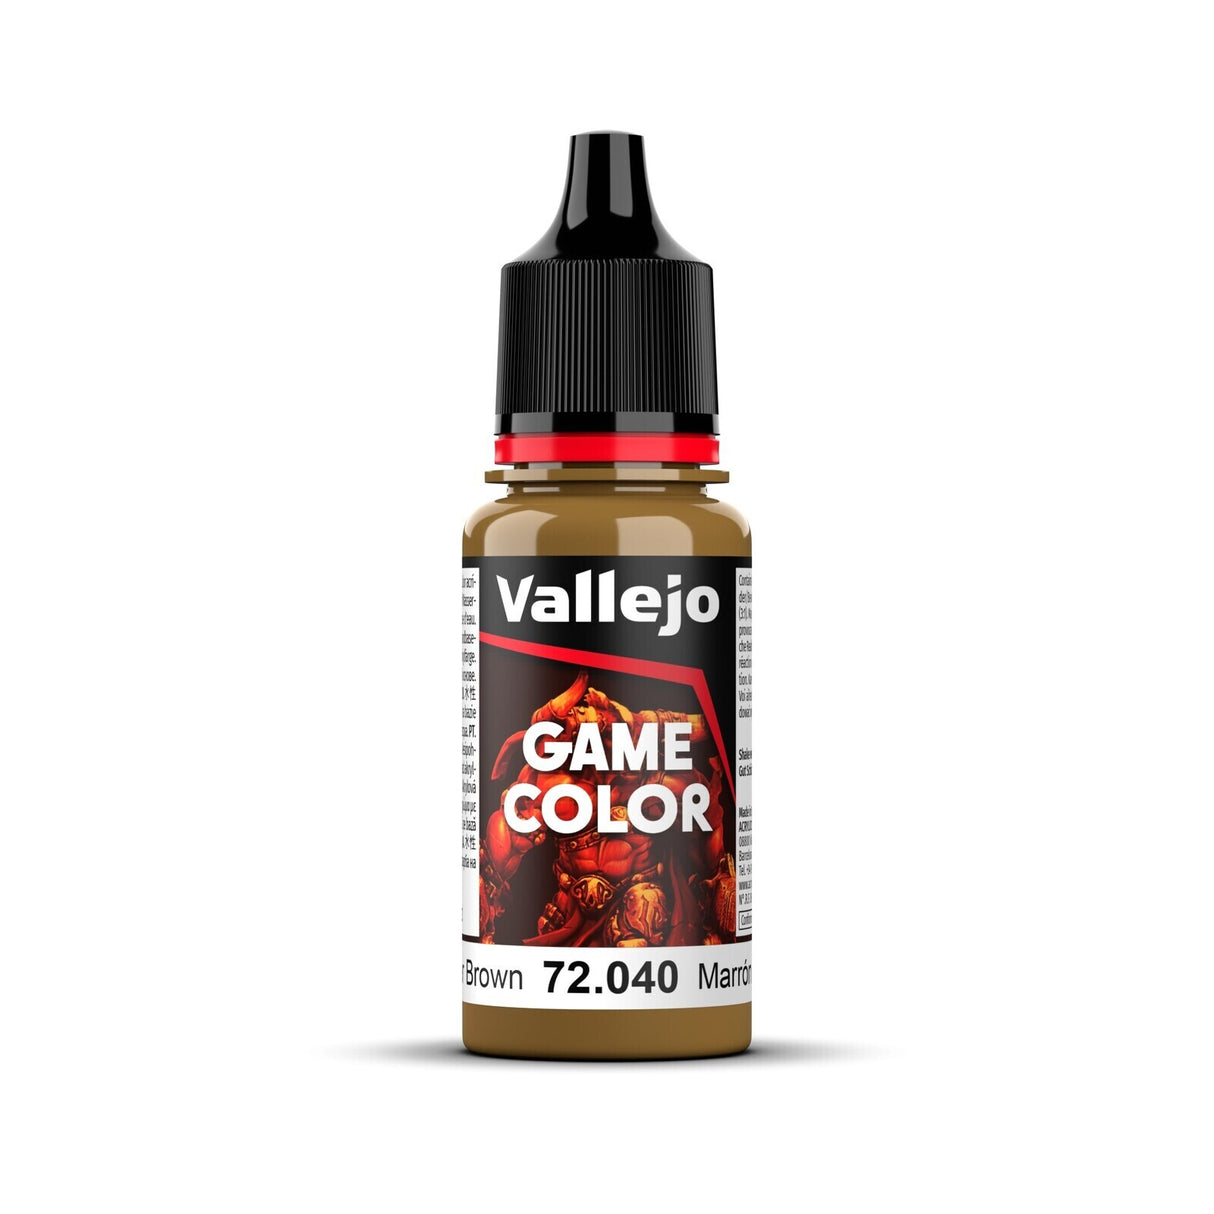 Vallejo Game Color Leather Brown 18ml Acrylic Paint - Hobbytech Toys